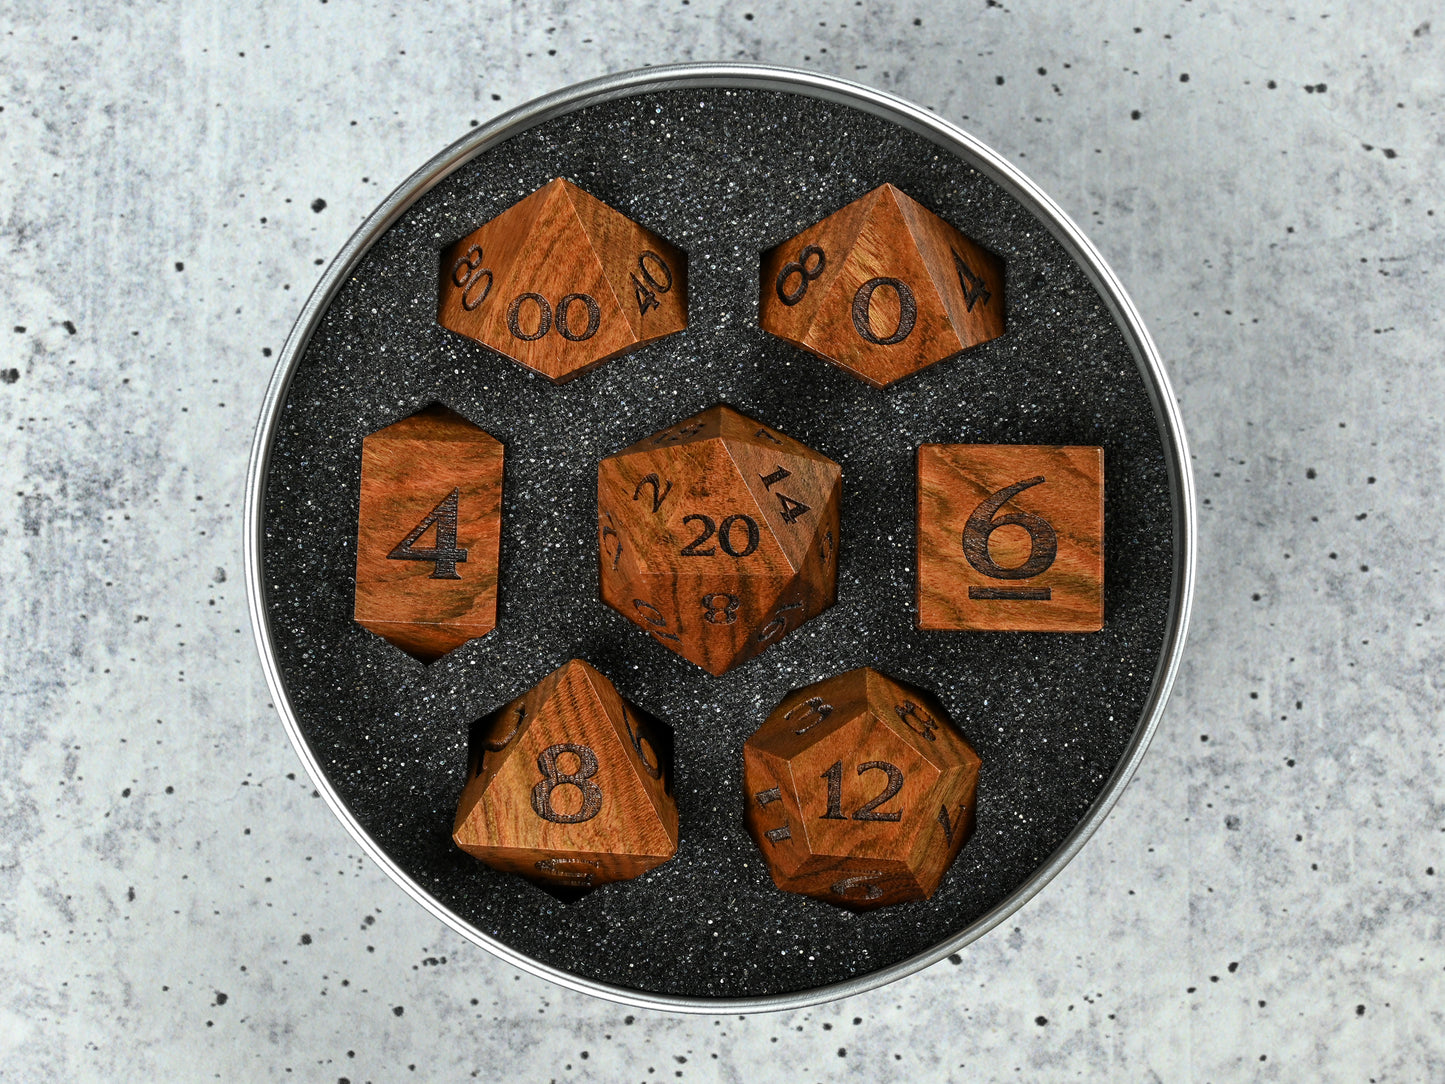 Poisonwood chechen dice set for dungeons & dragons dnd tabletop rpg.